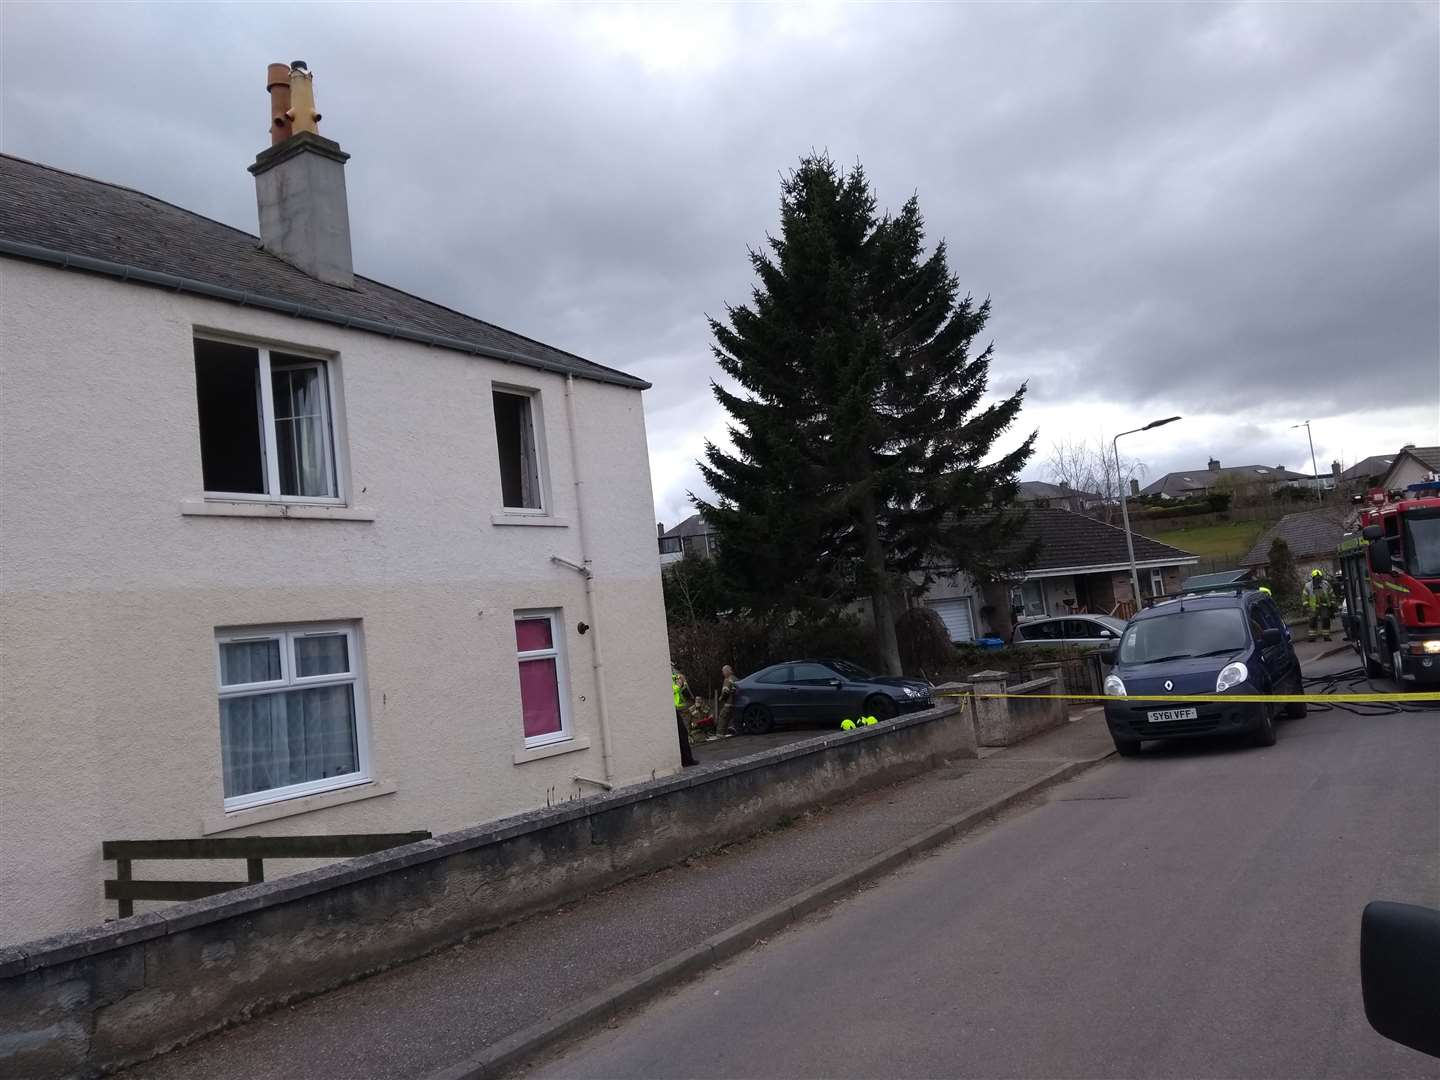 Man aged 99 rescued from house fire in Nairn.